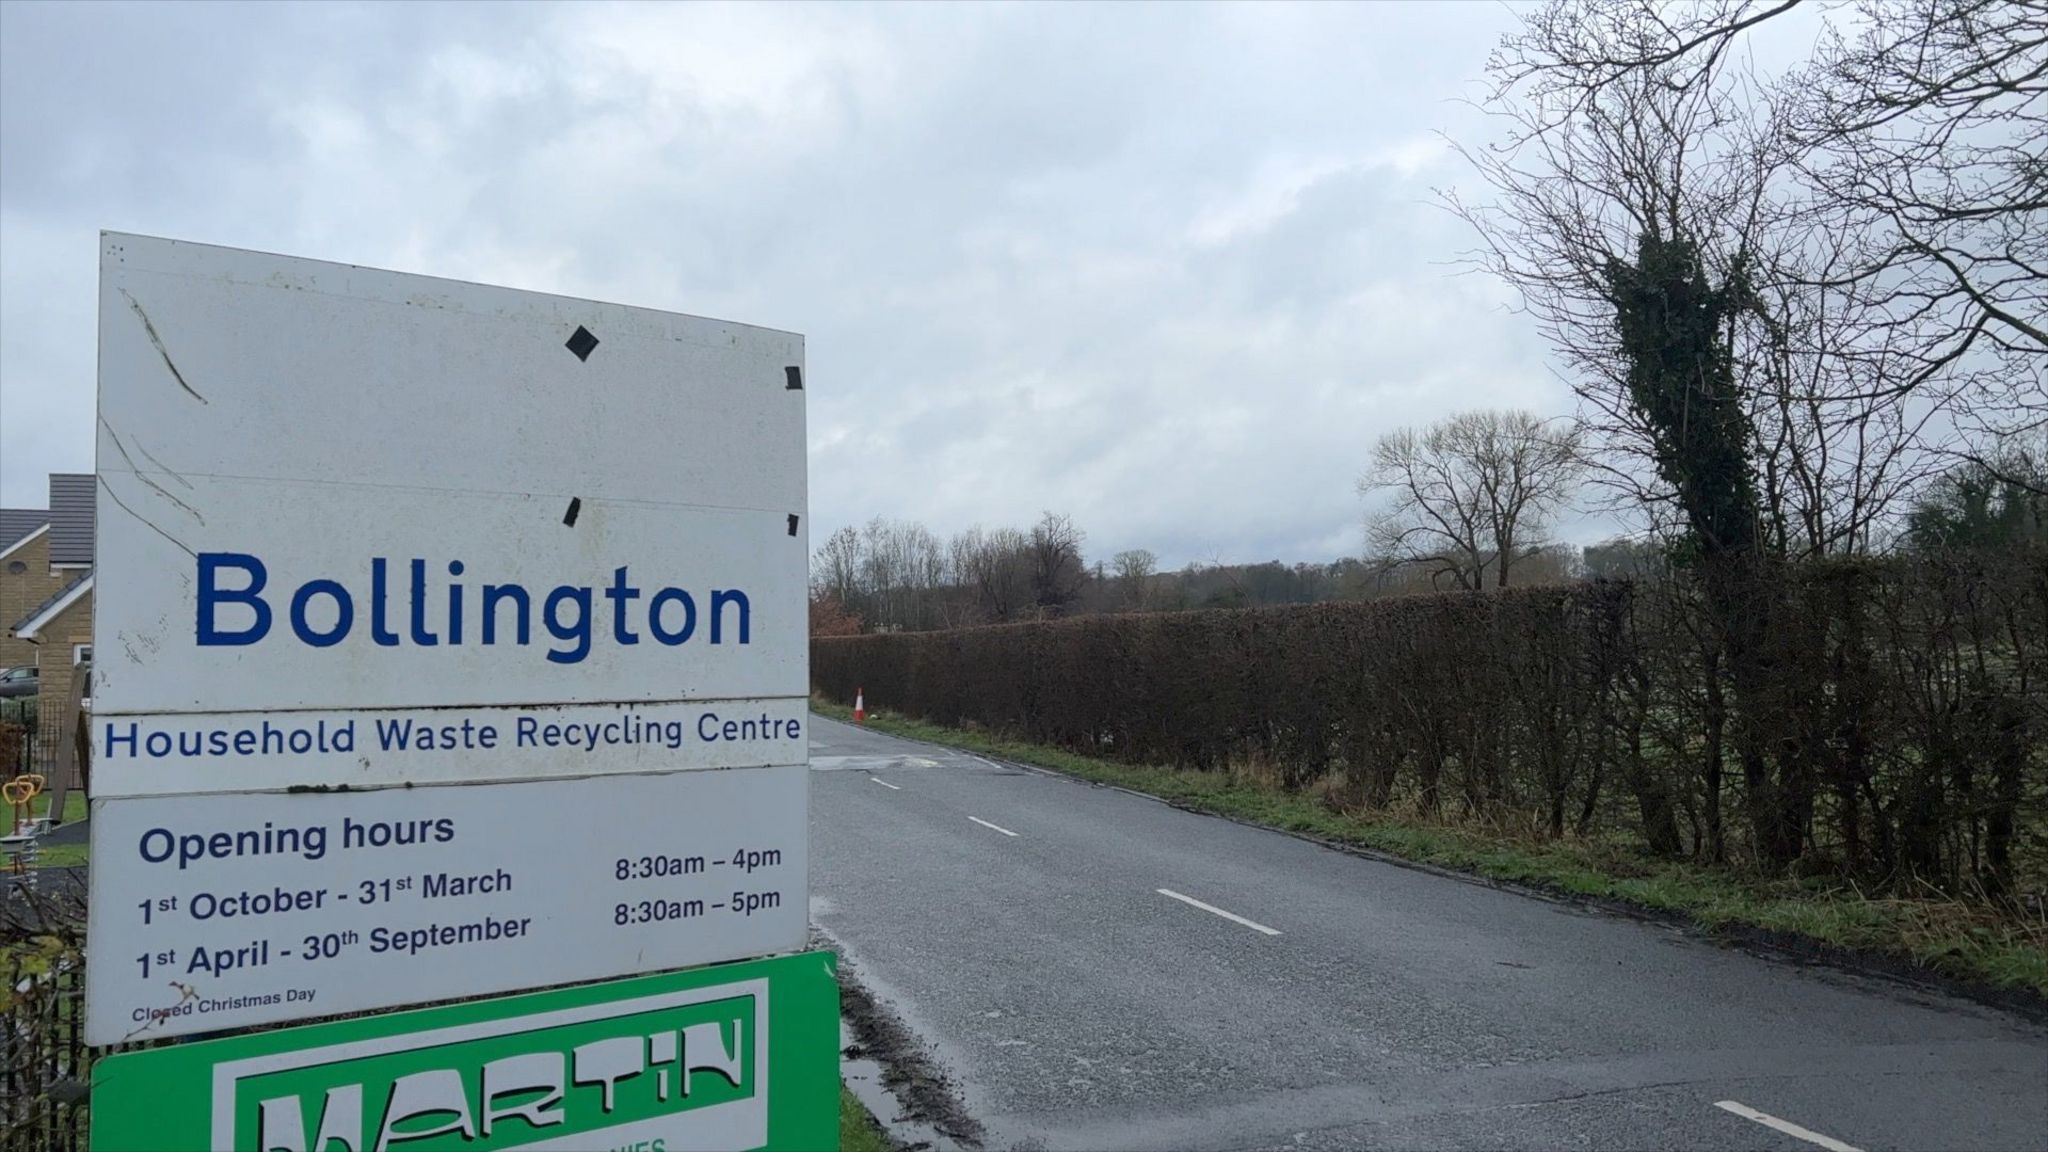 Bollington Household Waste Recycling Centre sign